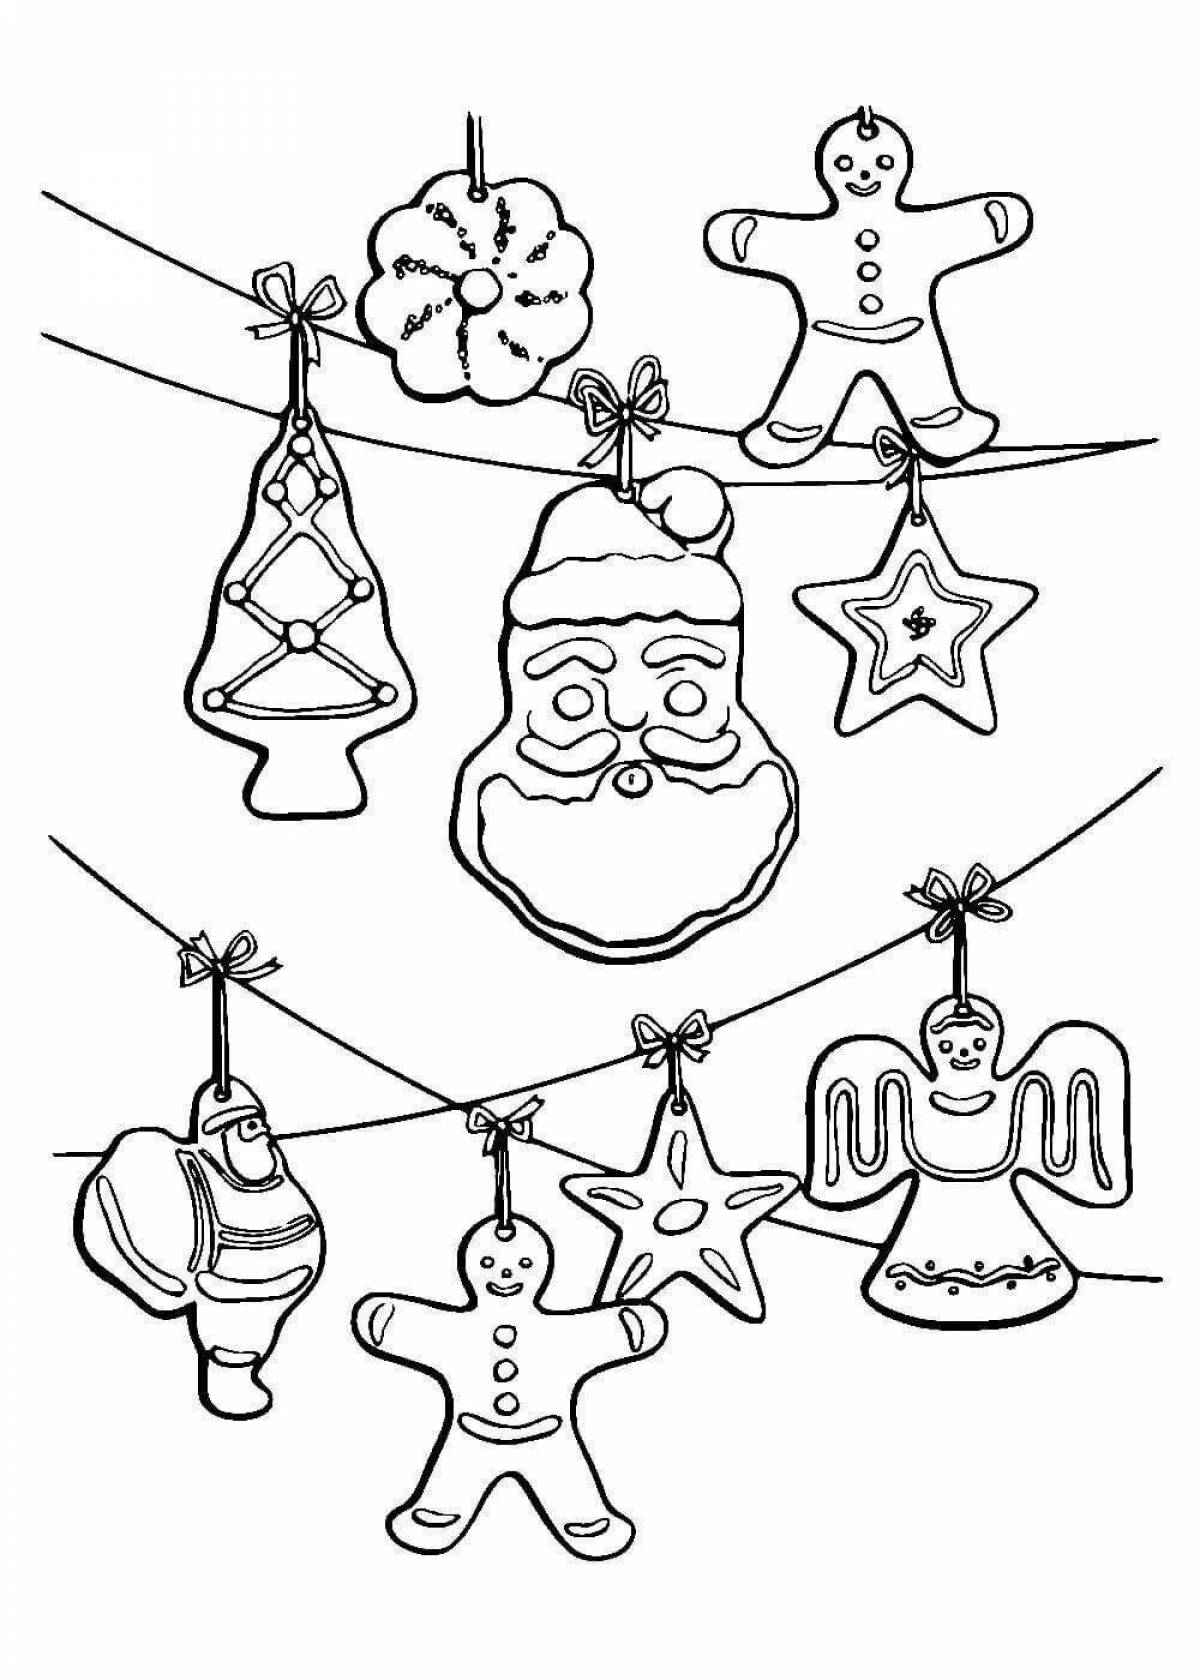 Children's coloring garland